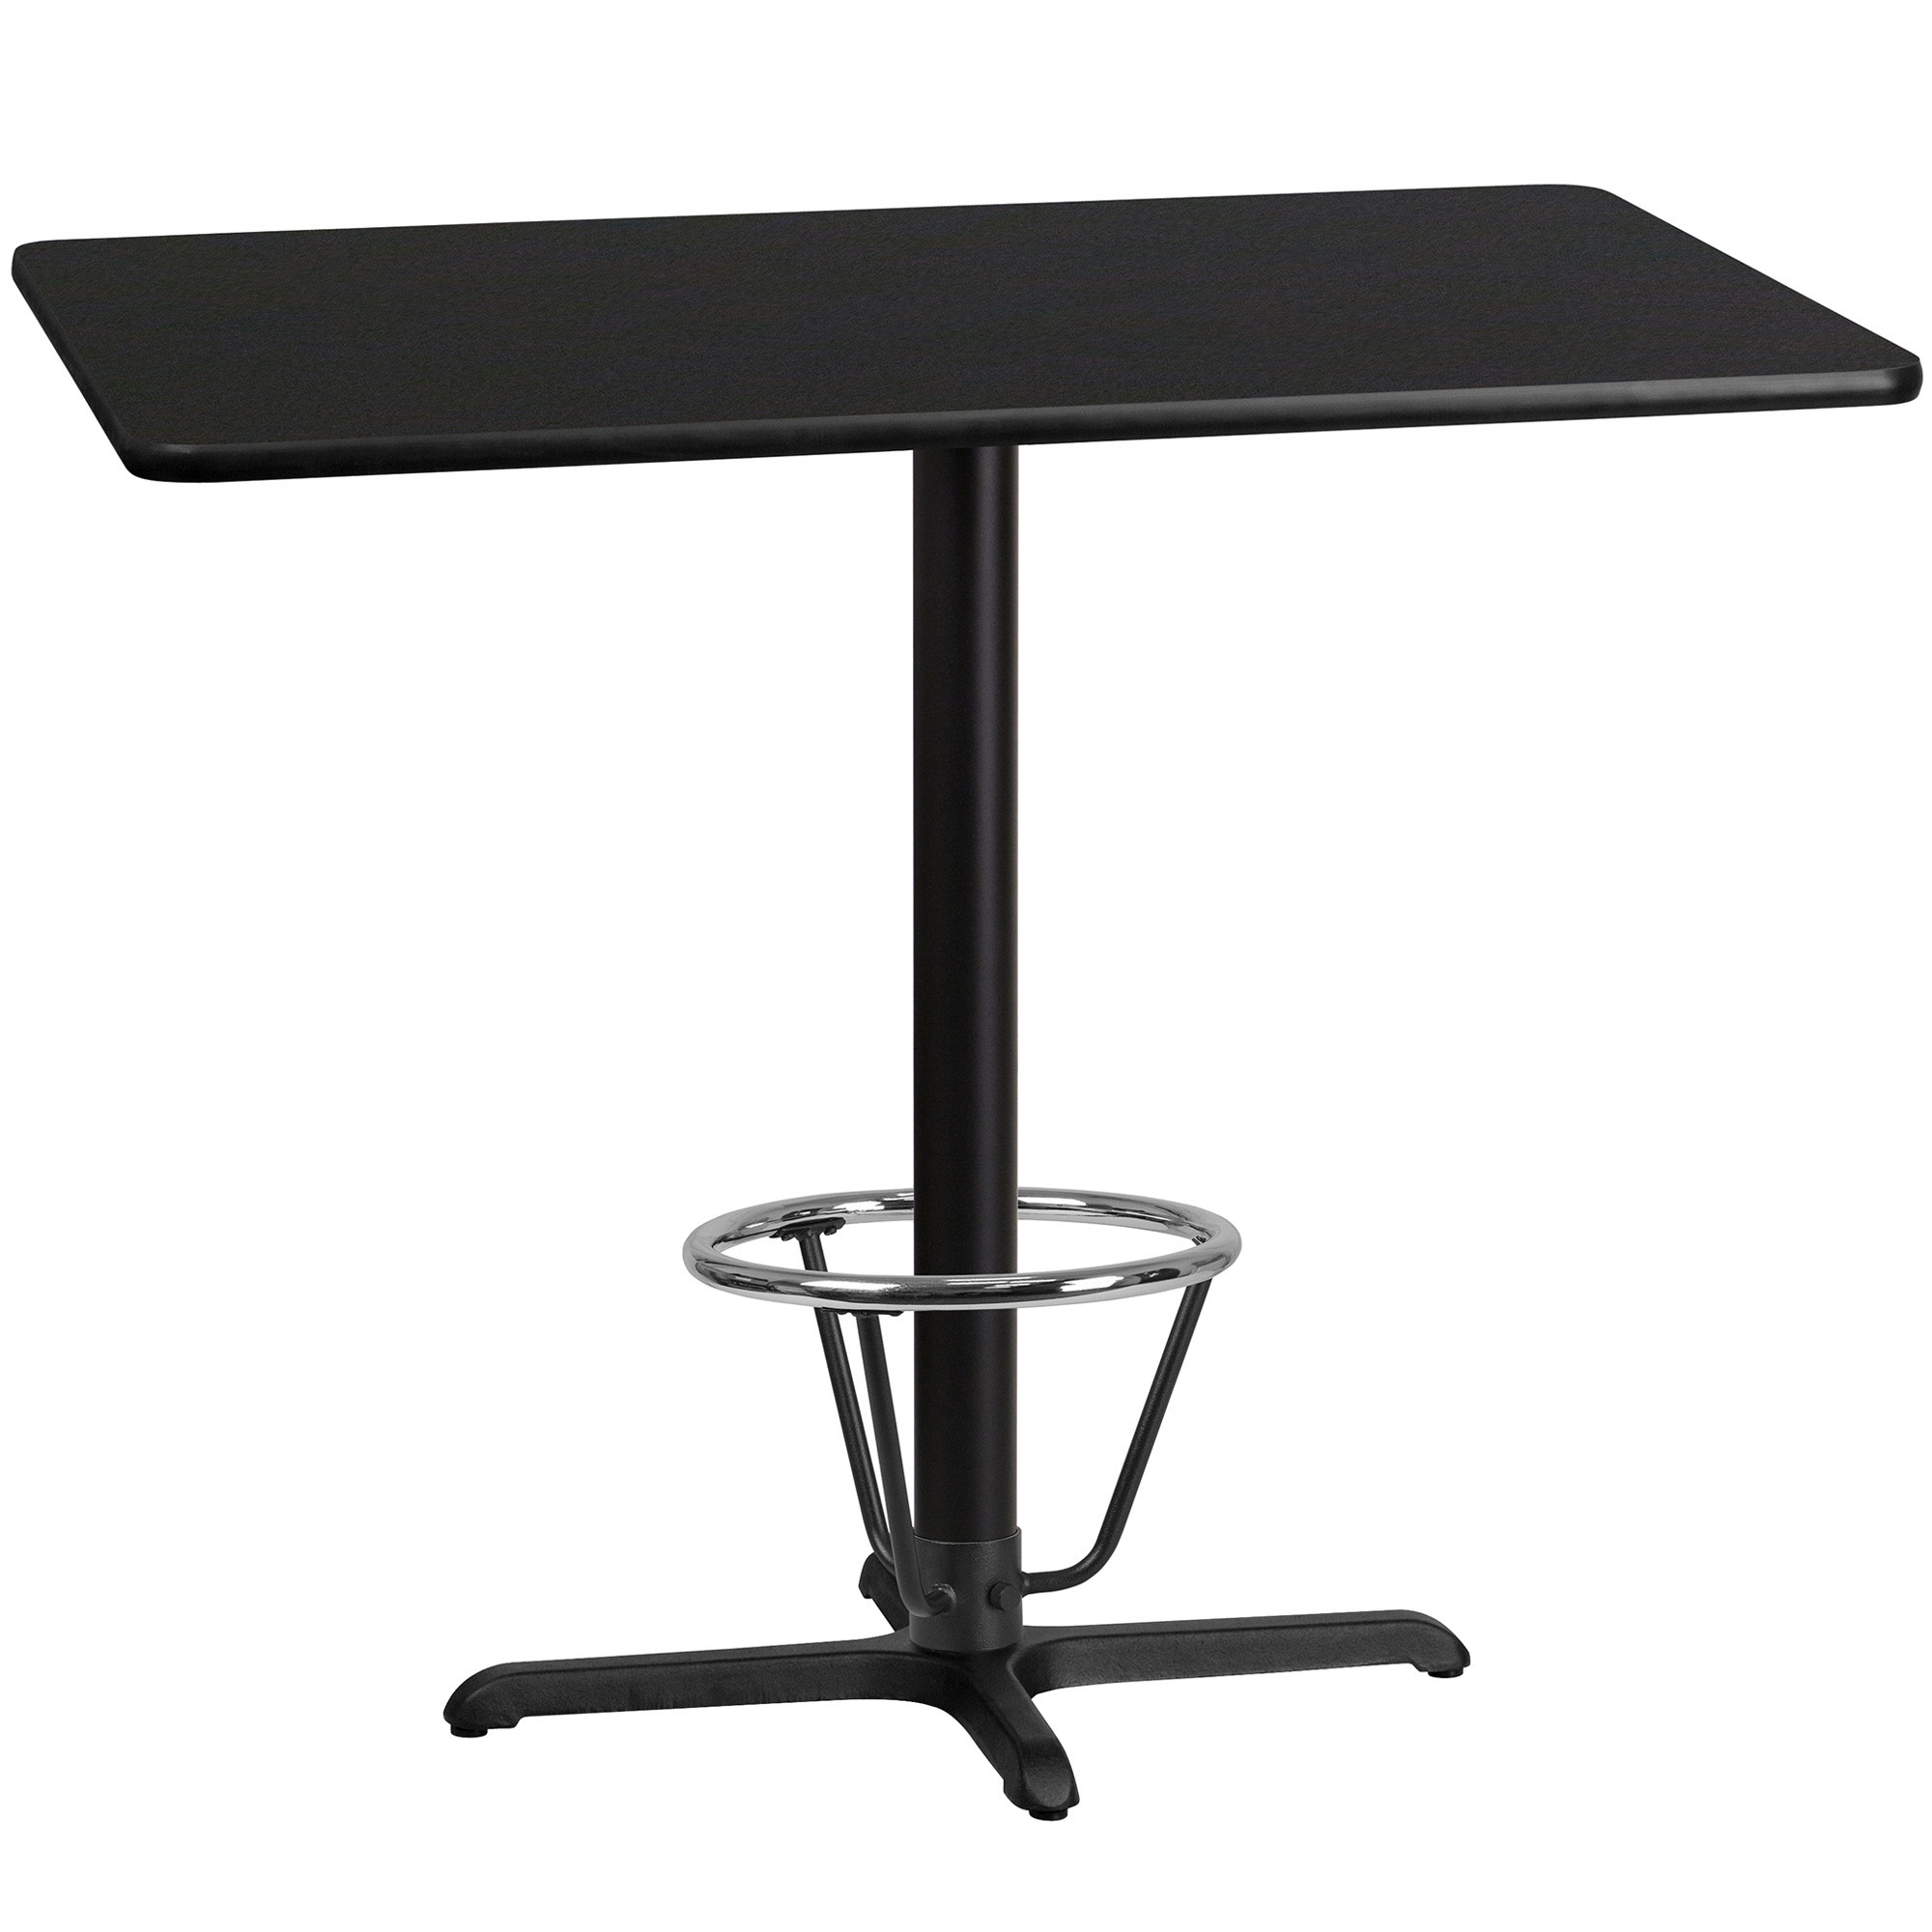 Flash Furniture 48Inch L x 30Inch W Bar Height Metal Table with X-Base â Black/Mahogany Reversible Laminate Top, Model XUBK3048T230B3F